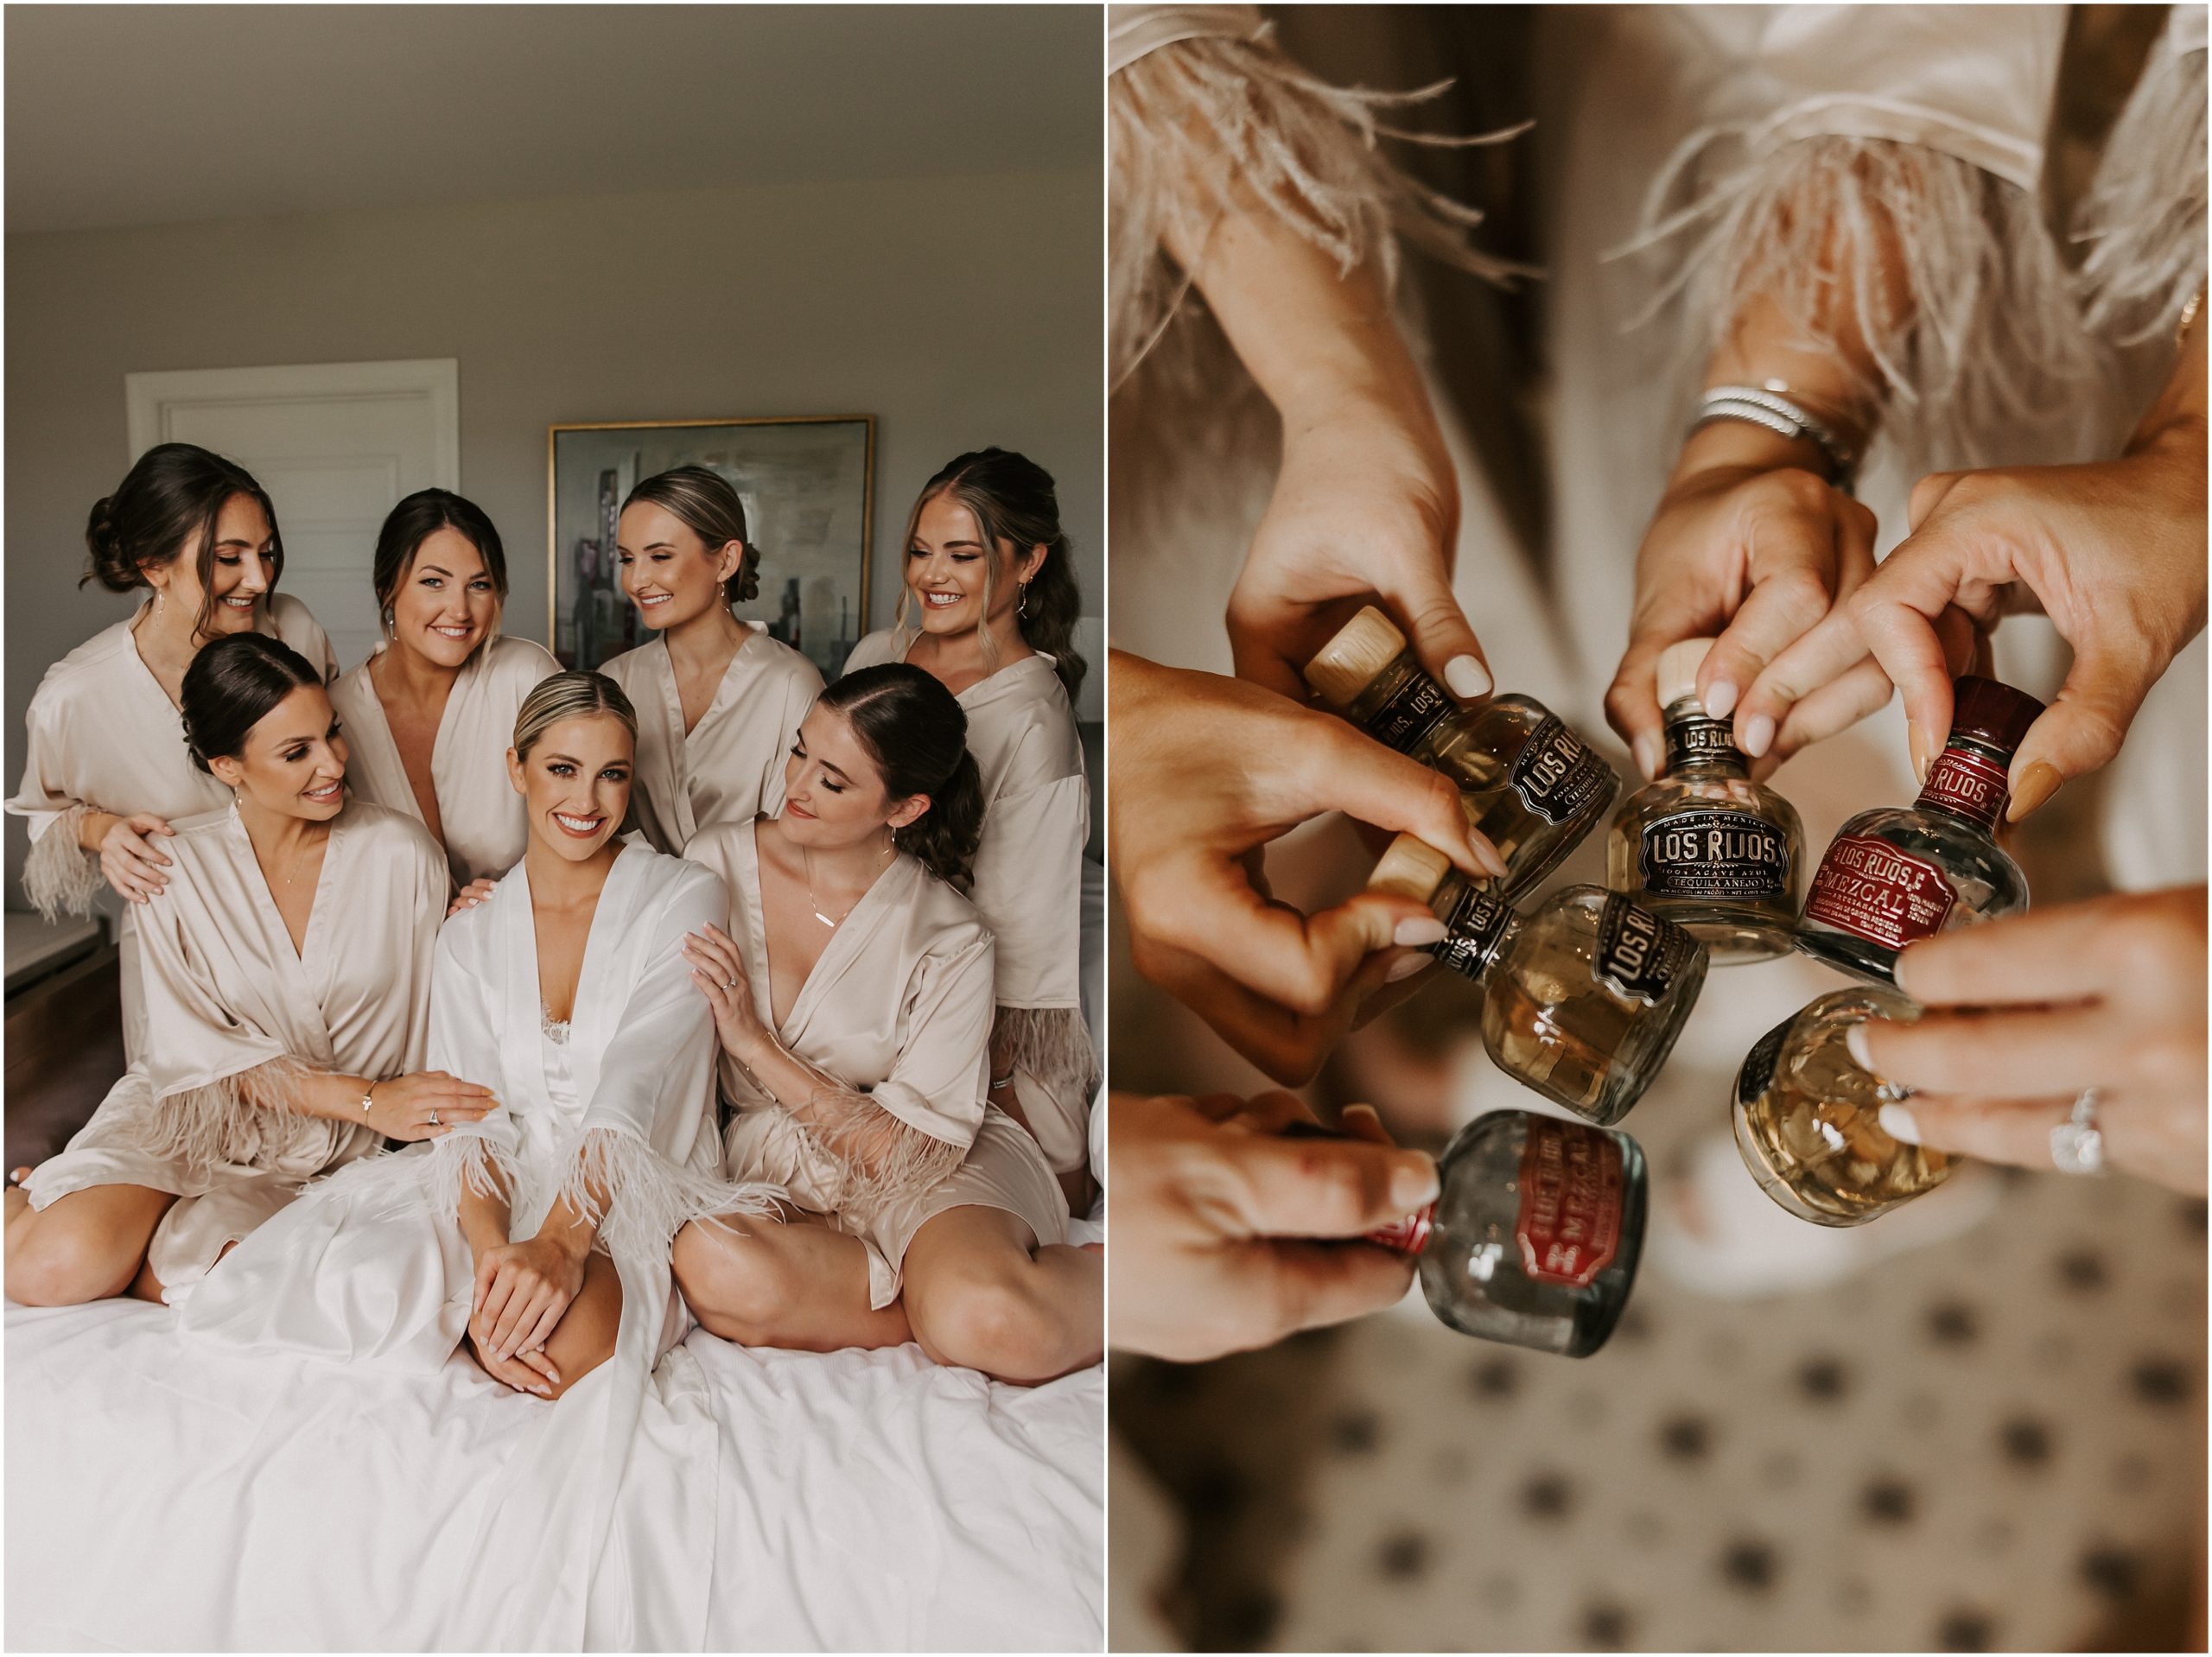 A good idea to savor the morning and set the tone for your elegant and timeless wedding day with your bridal party is to get champagne and glasses. In this case Sydney also brought mini tequila bottles to share with her gals. 